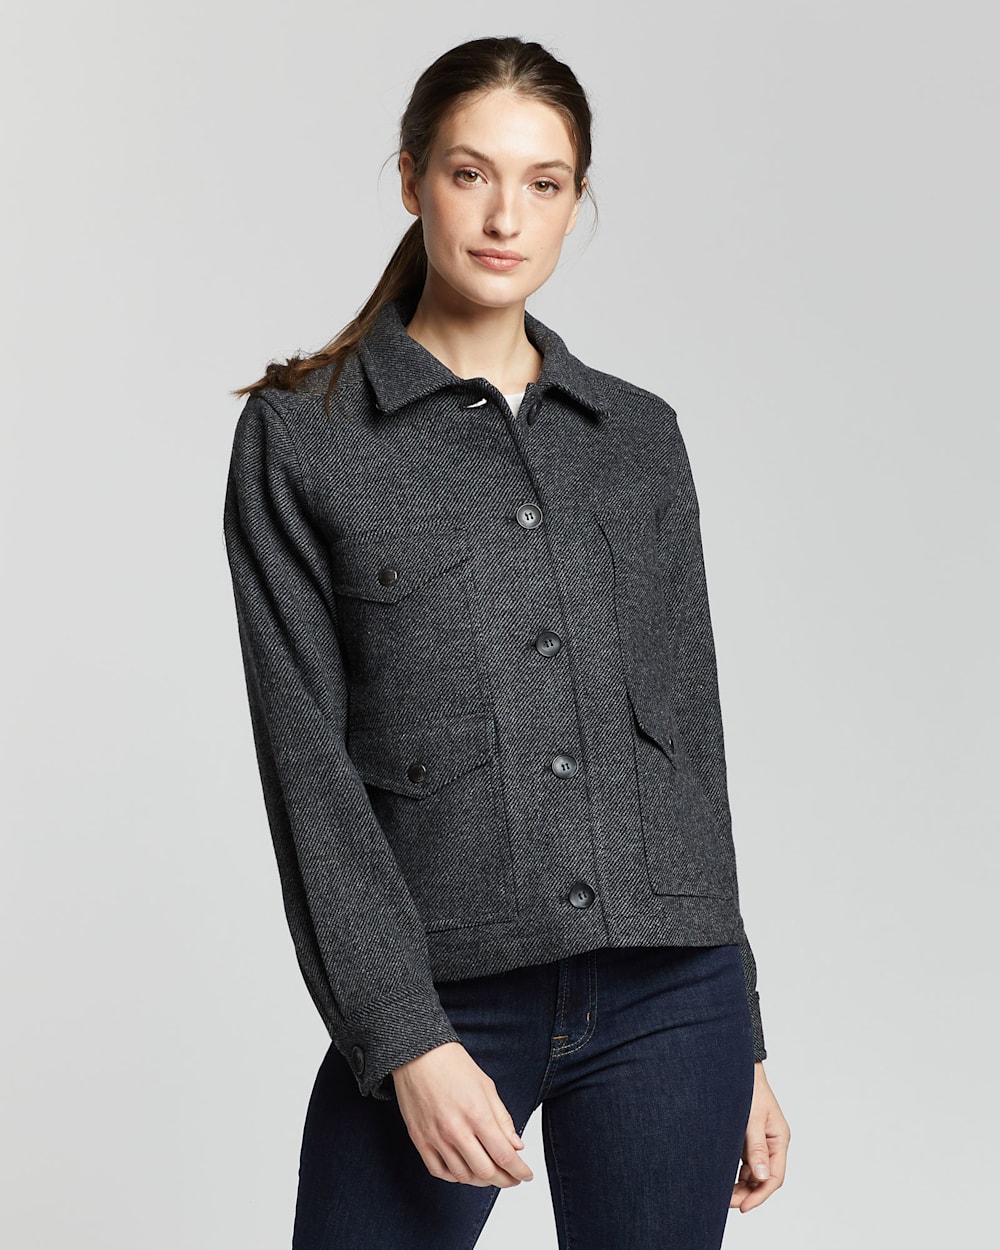 WOMEN'S WOOL TWILL UTILITY JACKET IN GREY MIX/BLACK image number 1